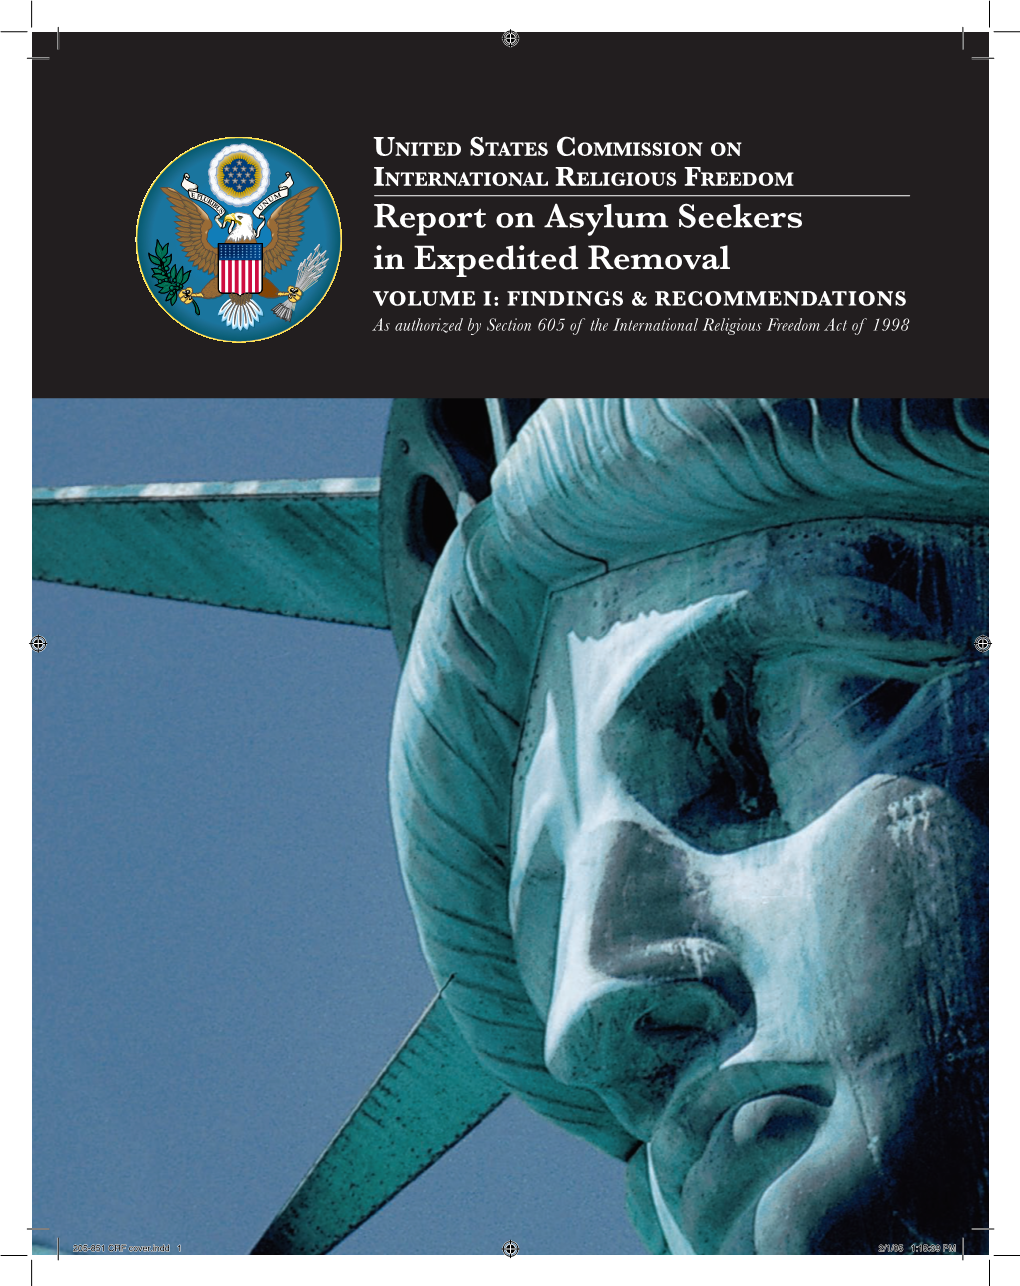 Report on Asylum Seekers in Expedited Removal VOLUME I: FINDINGS & RECOMMENDATIONS As Authorized by Section 605 of the International Religious Freedom Act of 1998